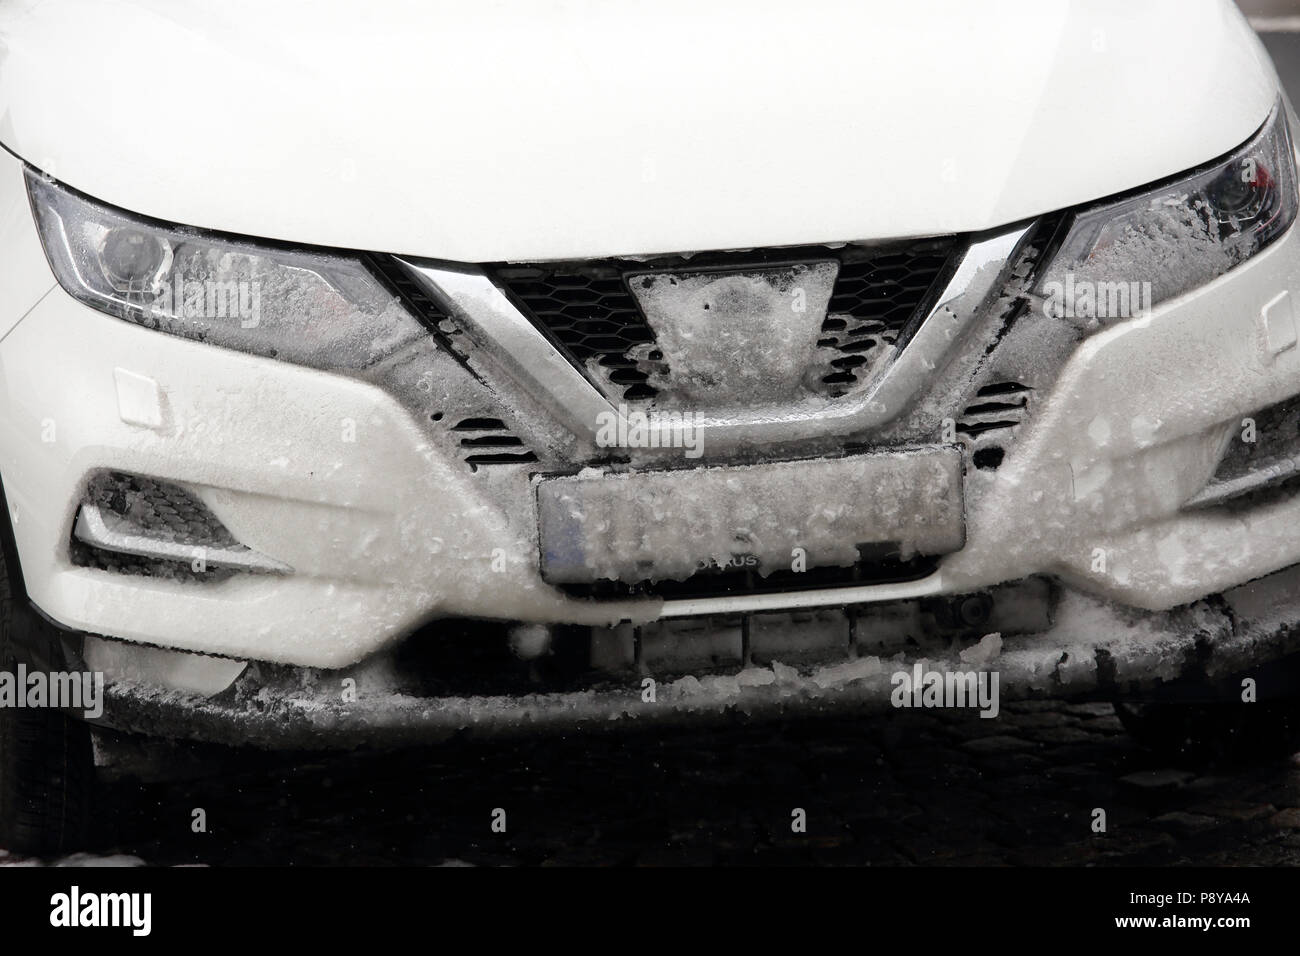 Munich, Germany, license plate of a car is covered in snow Stock Photo